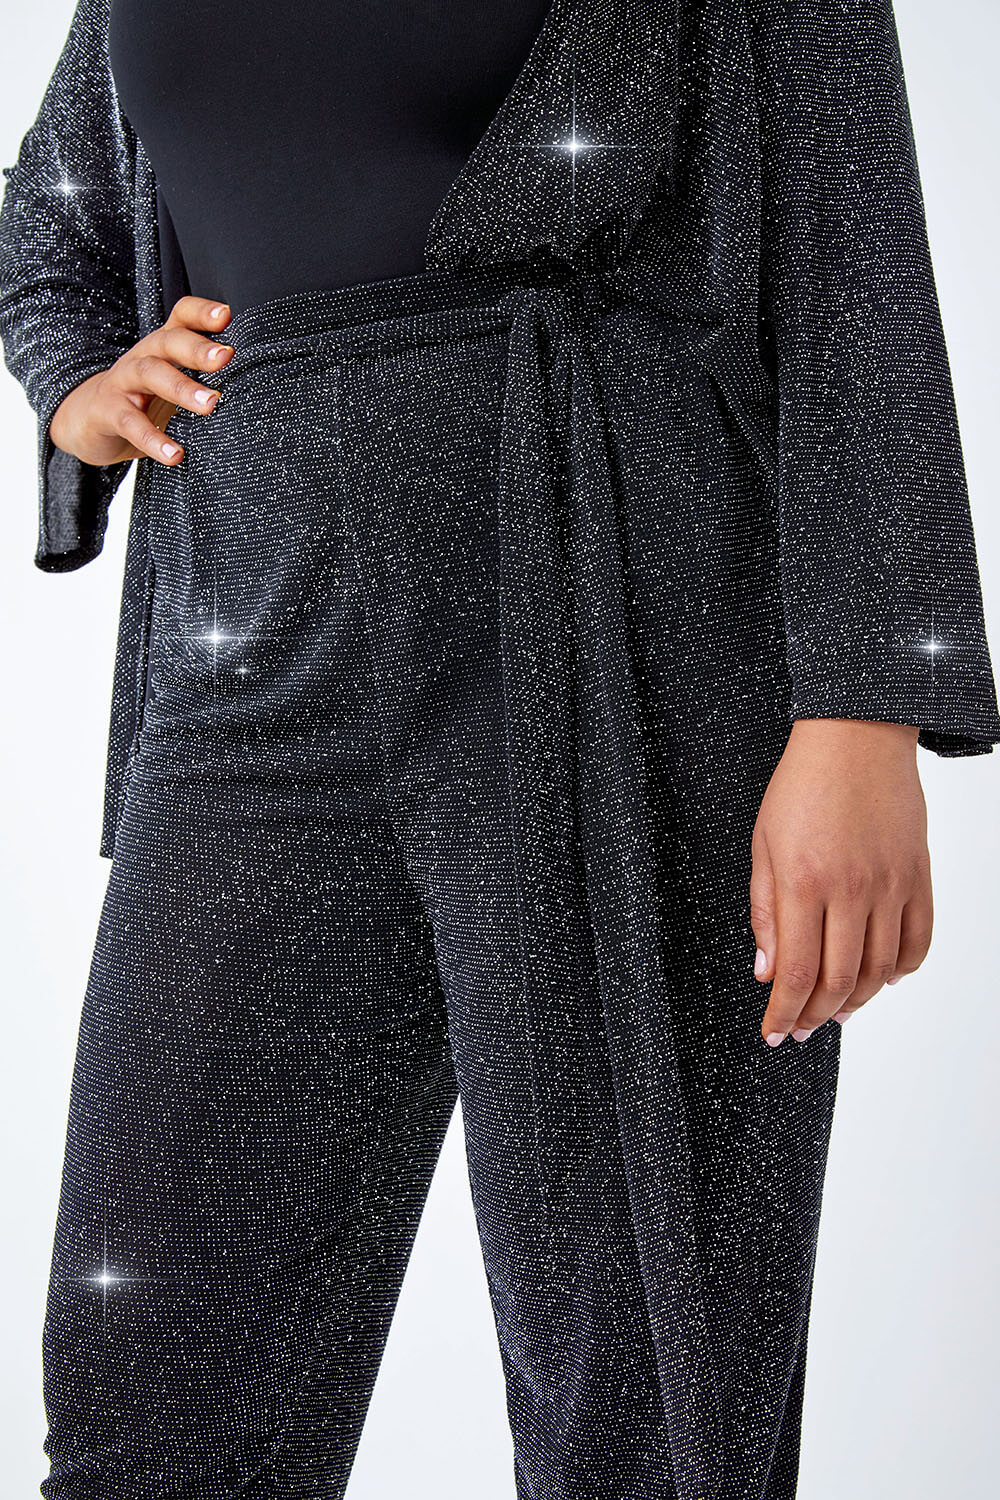 Black Curve Glitter Belted Tapered Stretch Trousers, Image 5 of 5